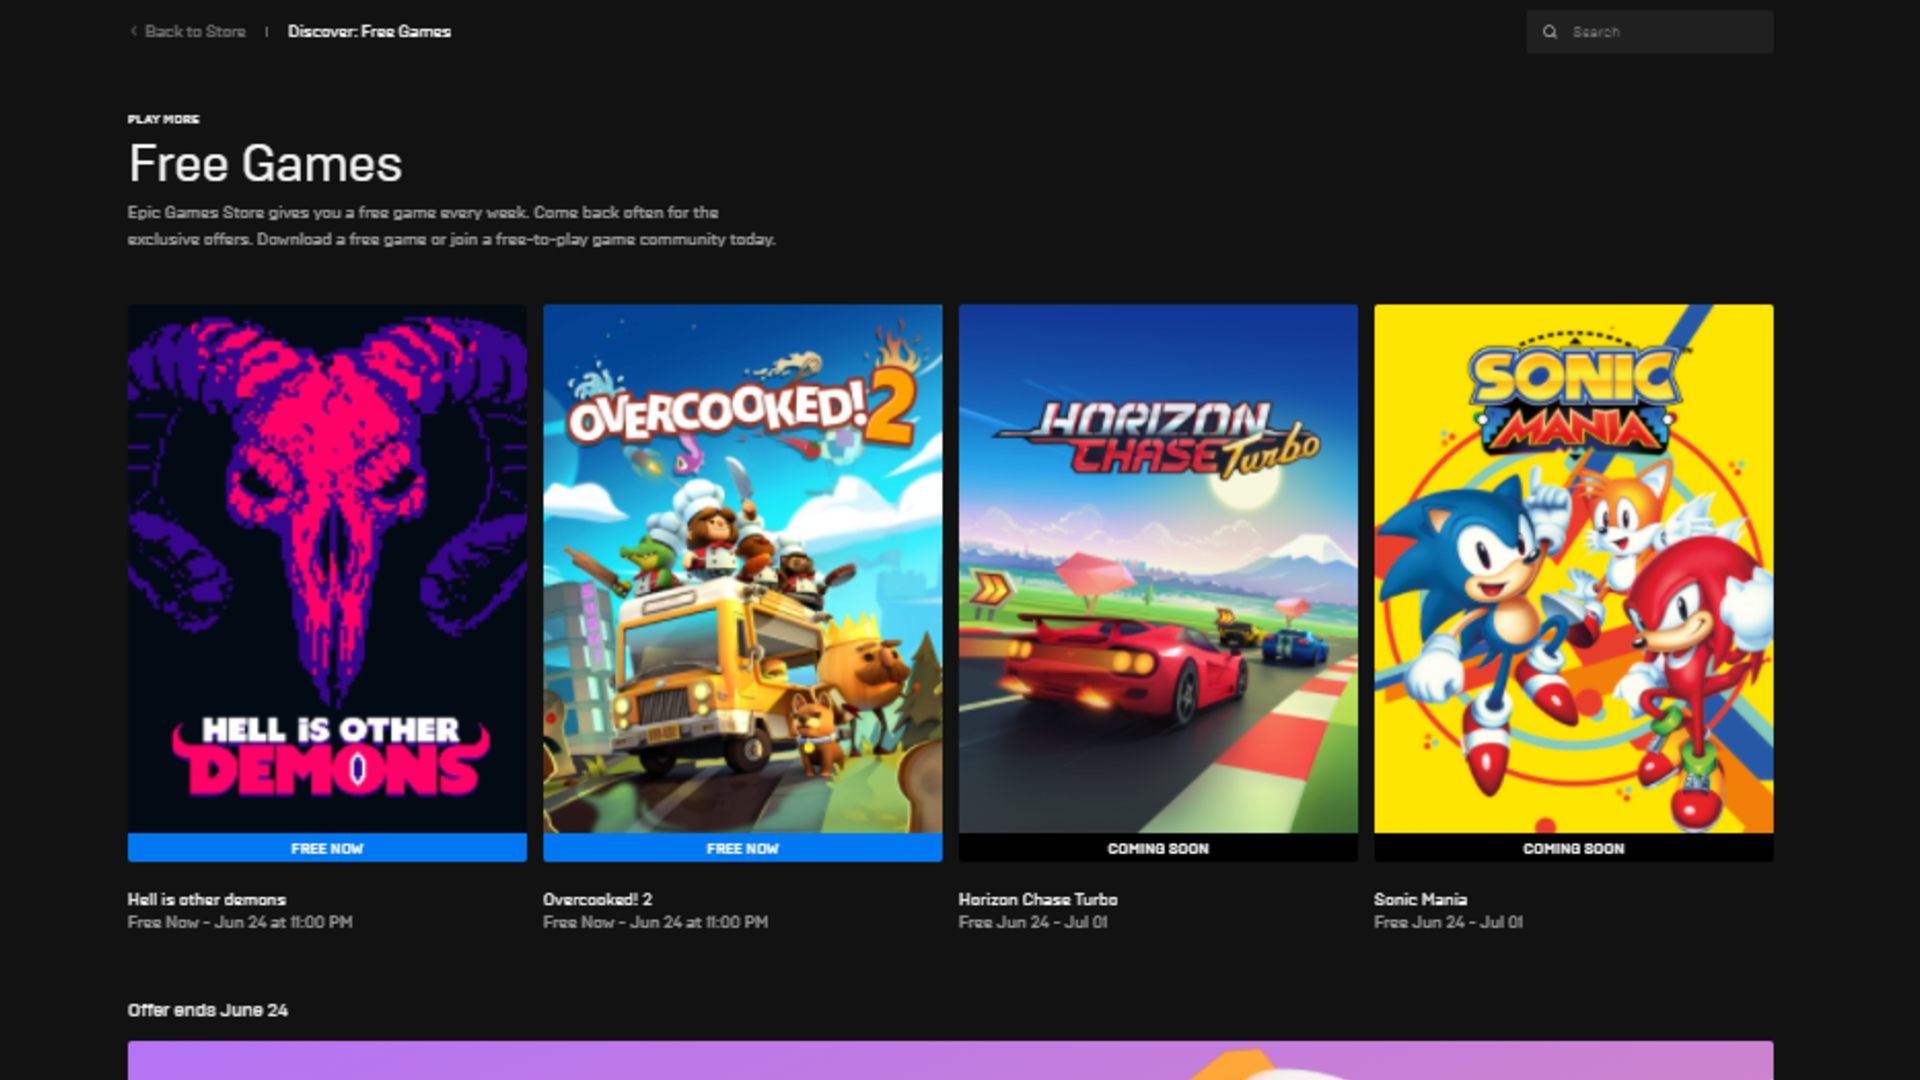 Epic Games Store Free Games